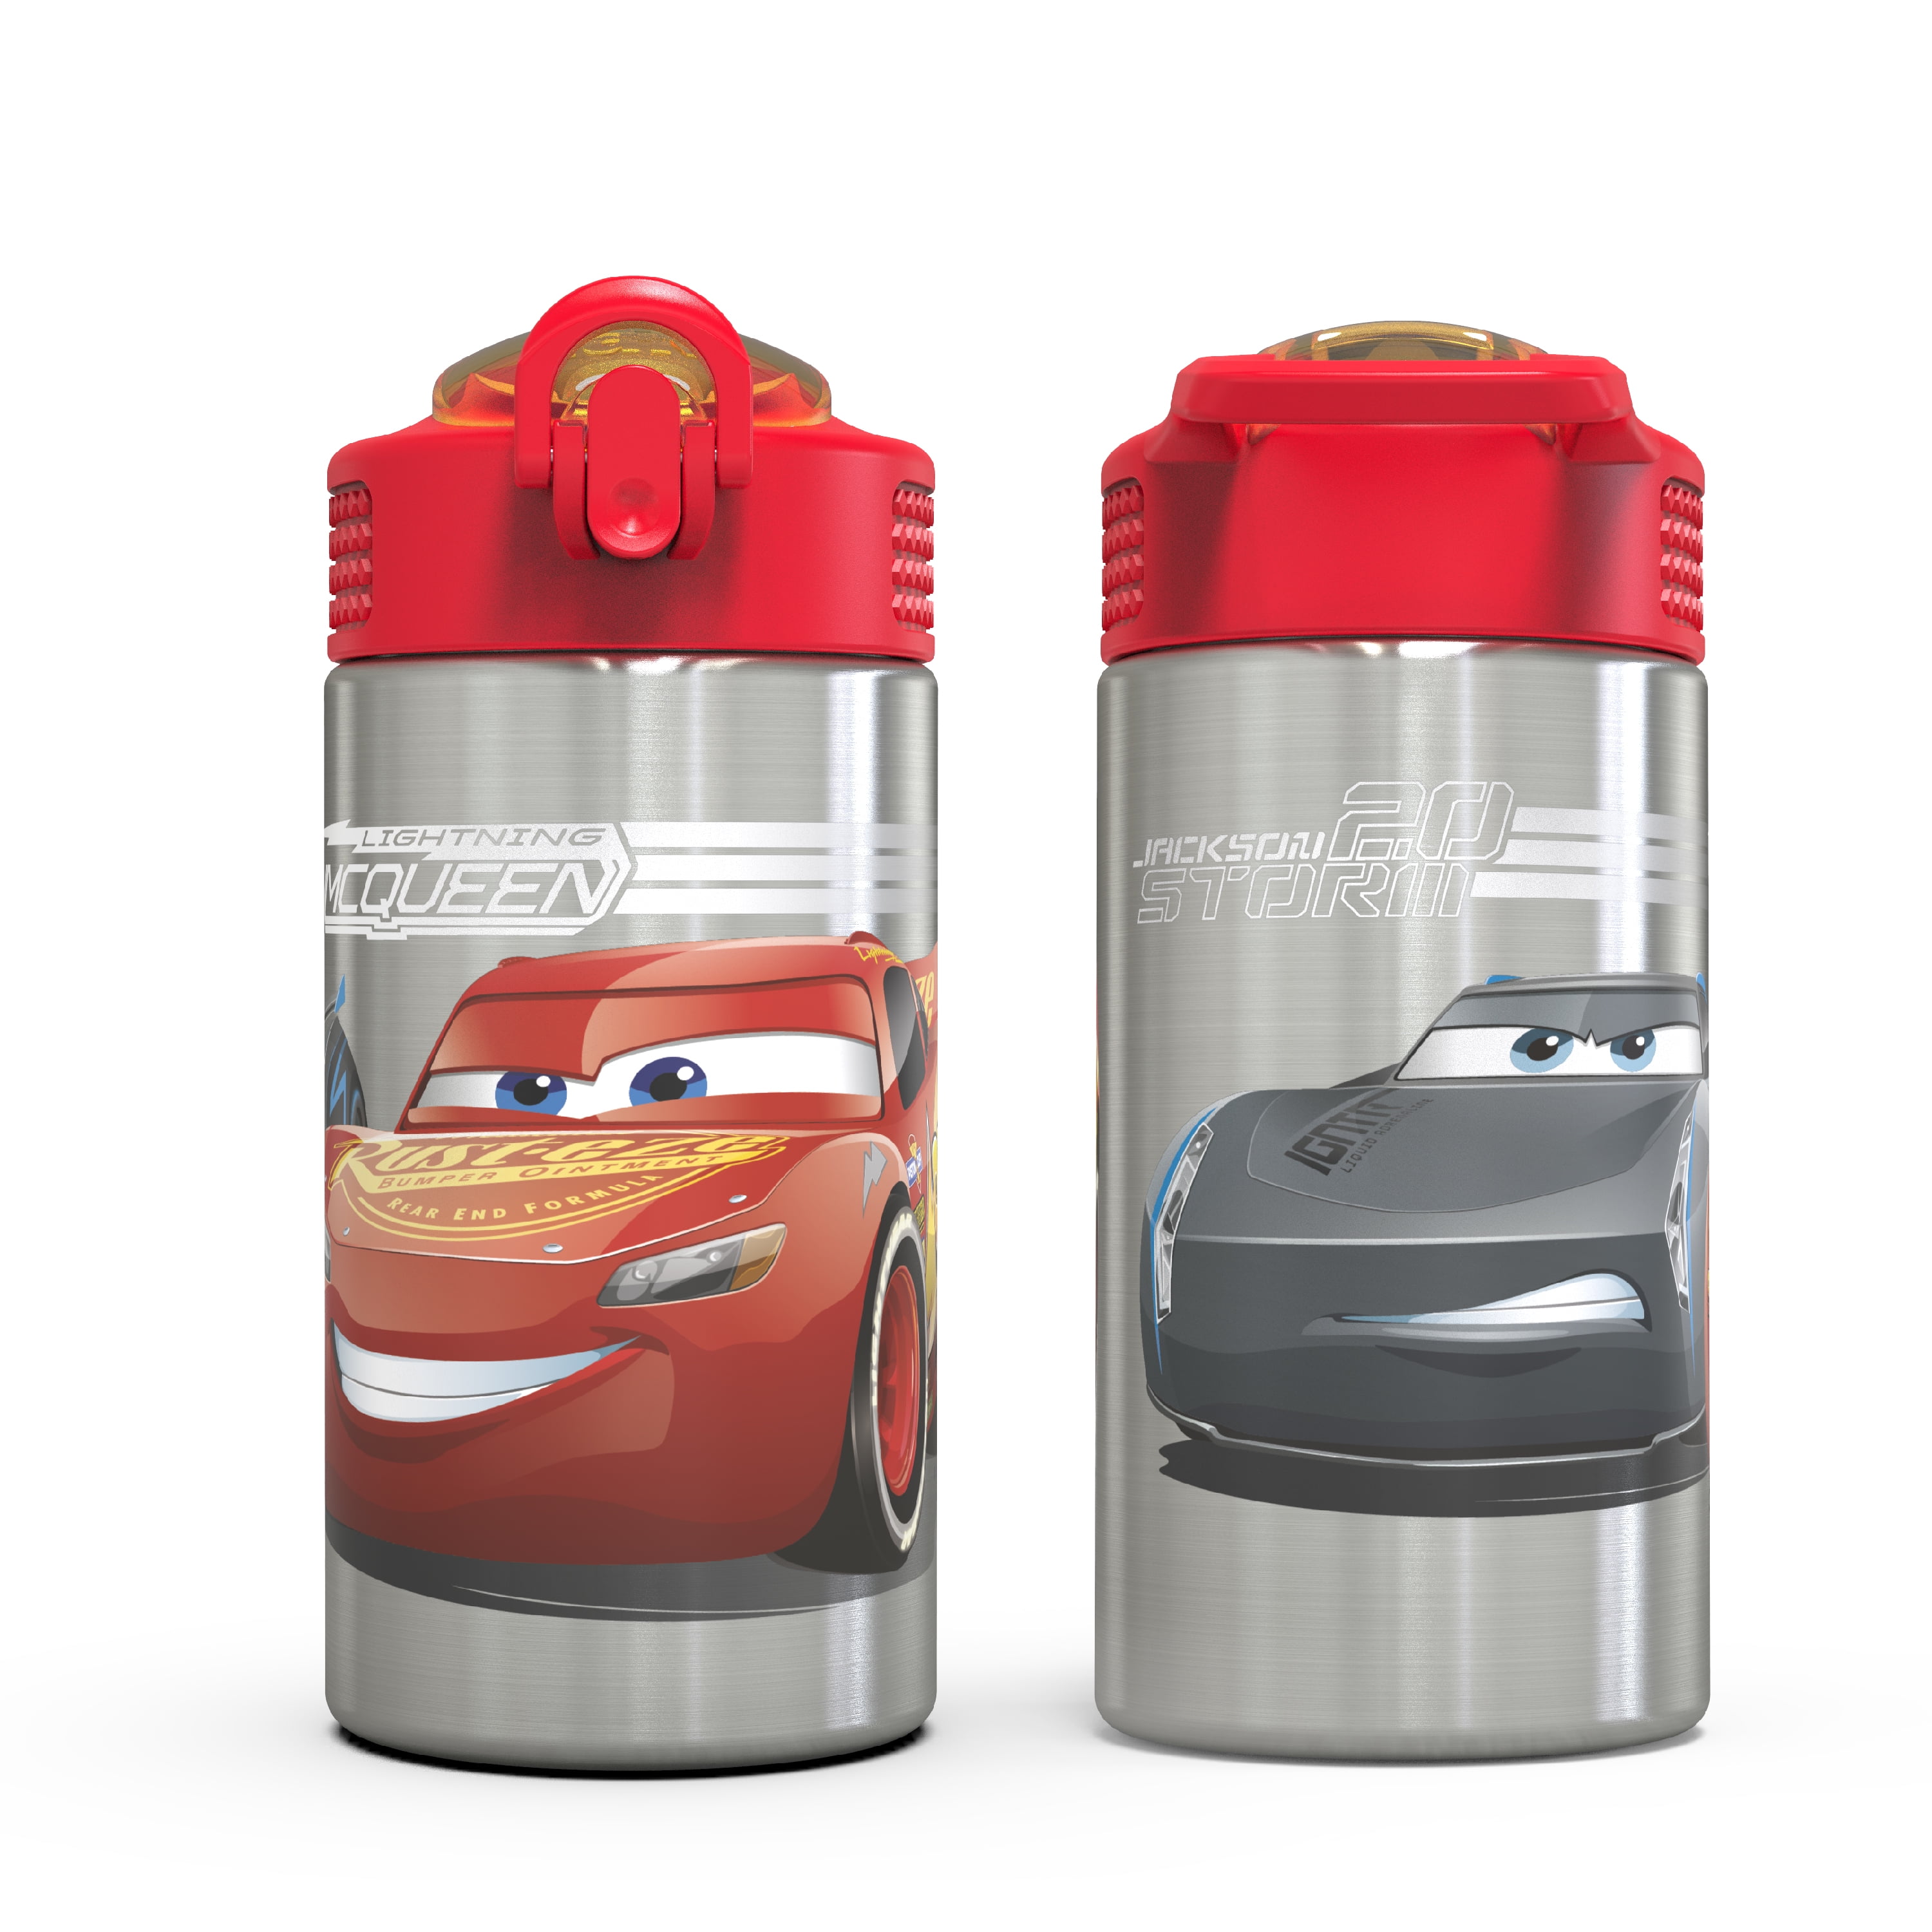 Zak! Designs Cars Lightning McQueen Plastic Cup with Lid and Straw  Red/Black 15 oz